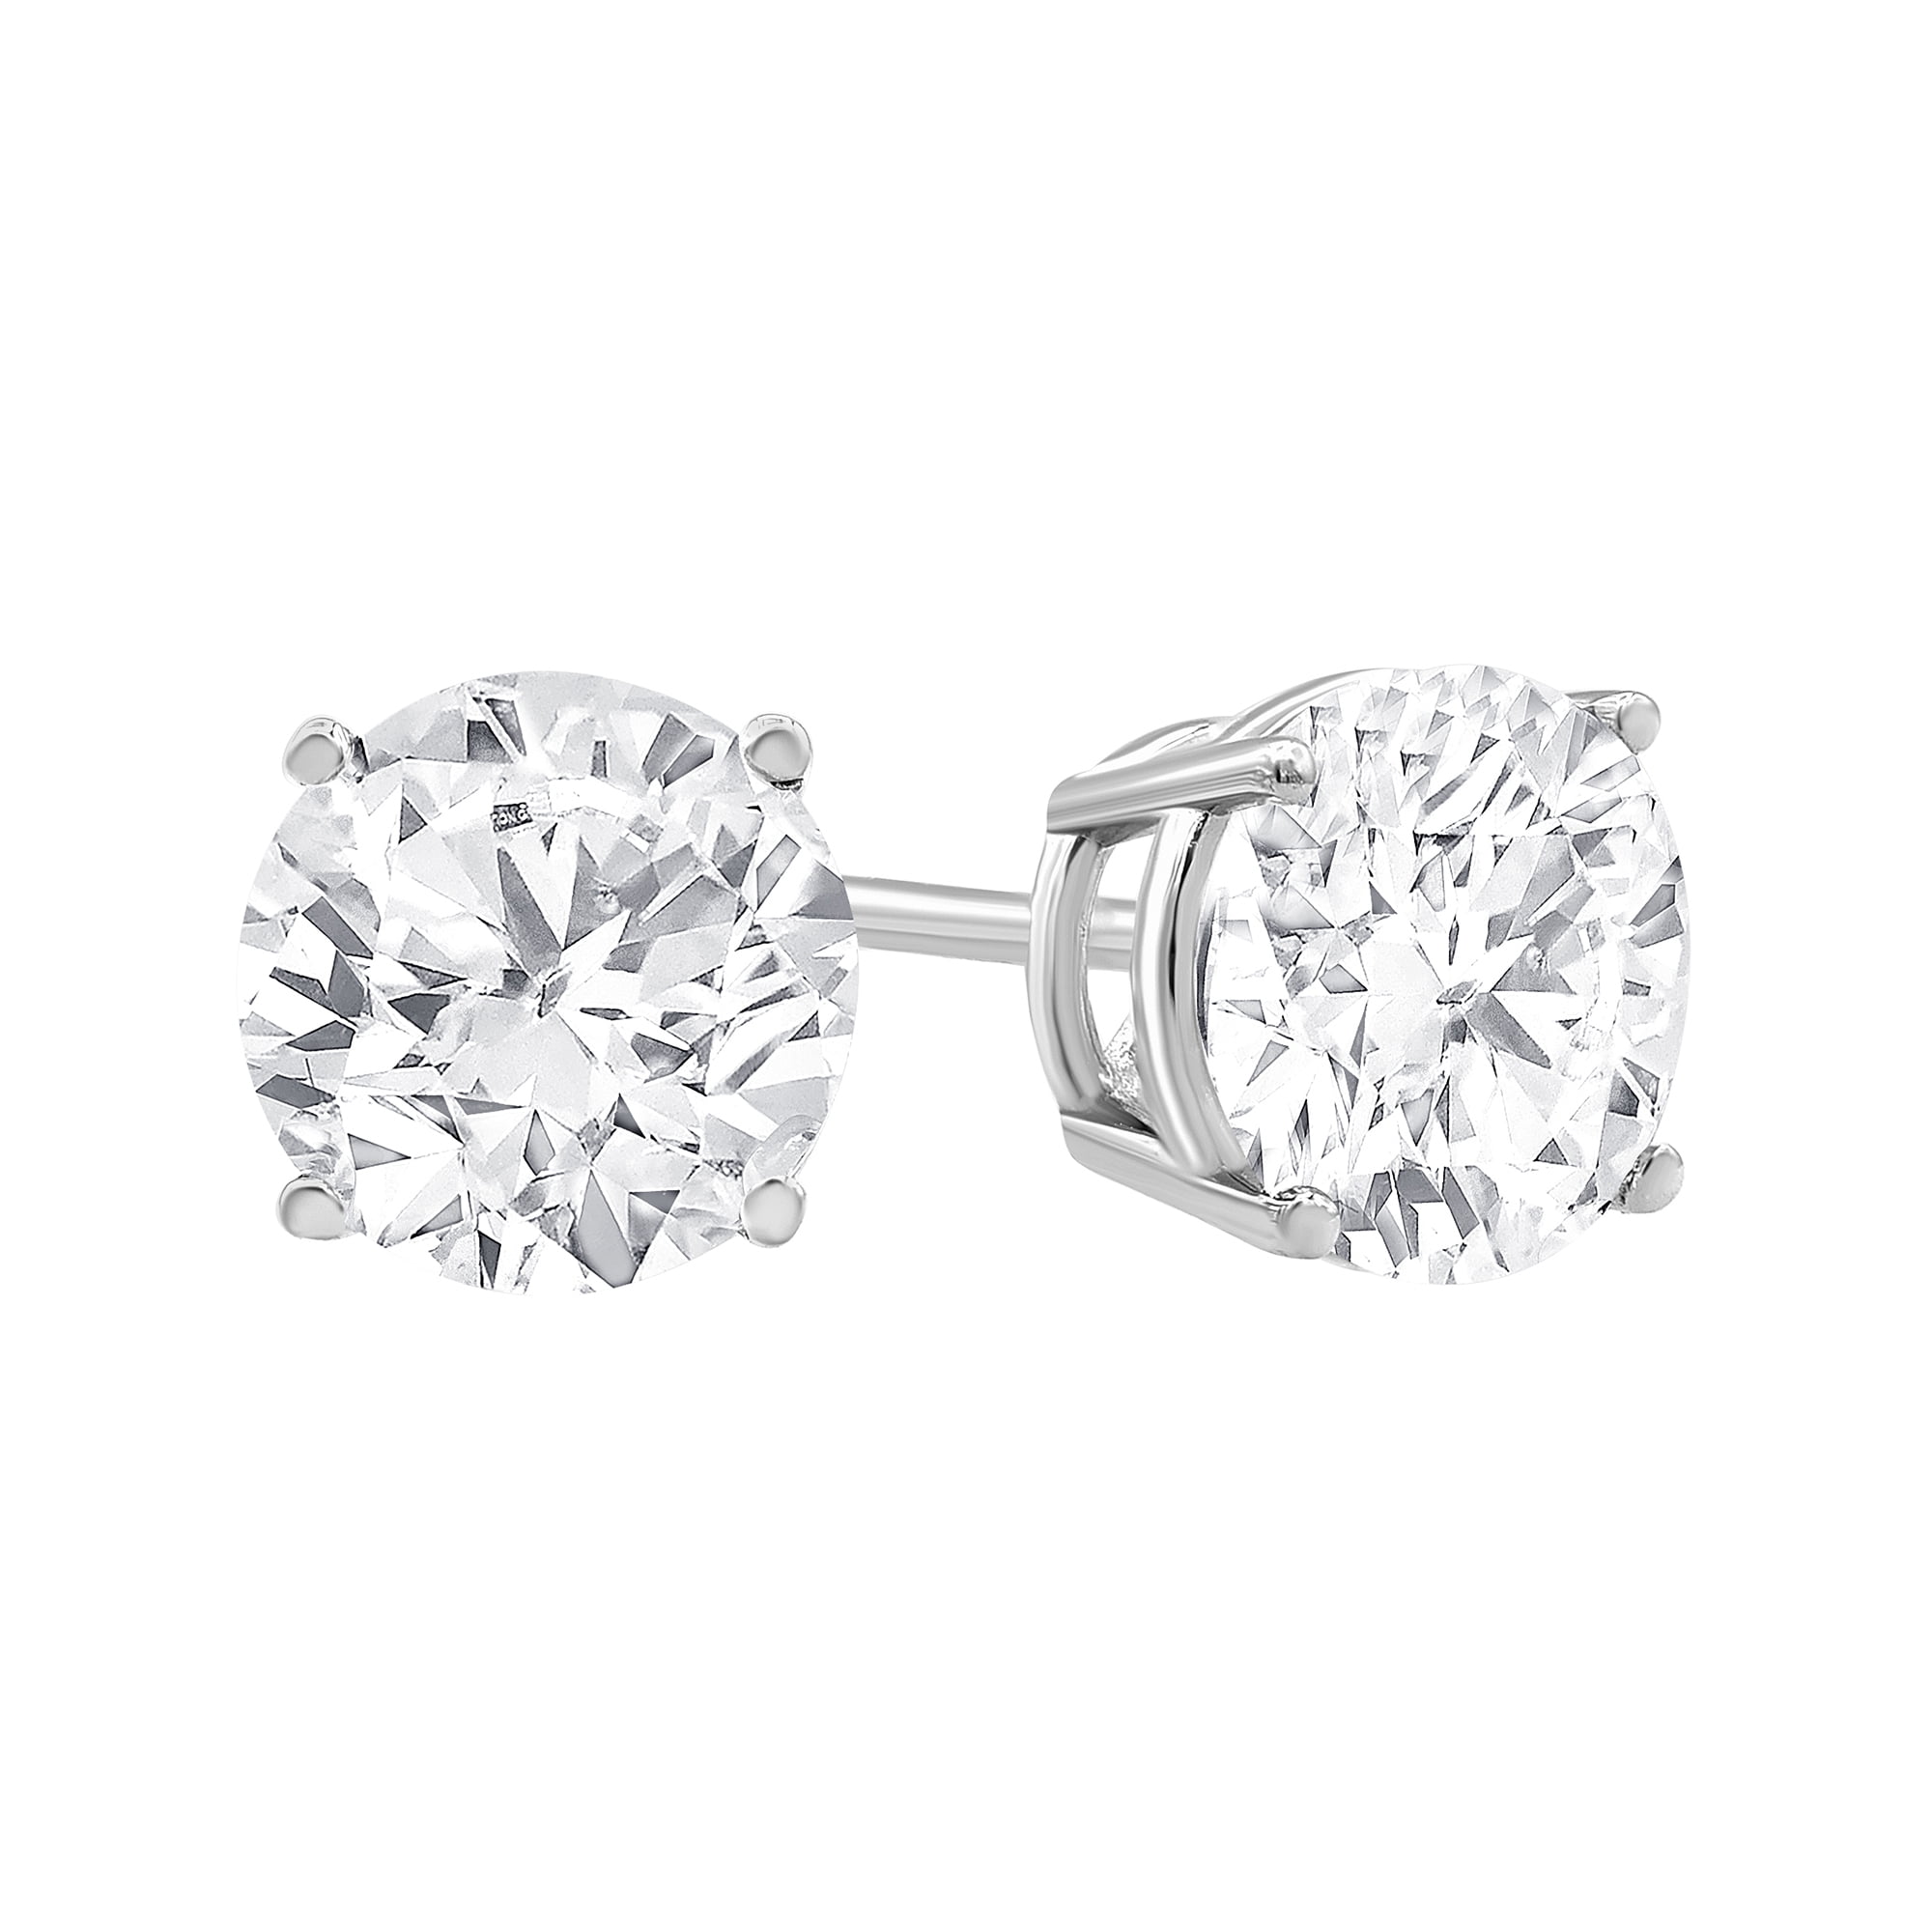 14k White Gold Round Diamond Simulated Cubic Zirconia SINGLE STUD Earrings 4-Prong 1/4cttw,Excellent Quality